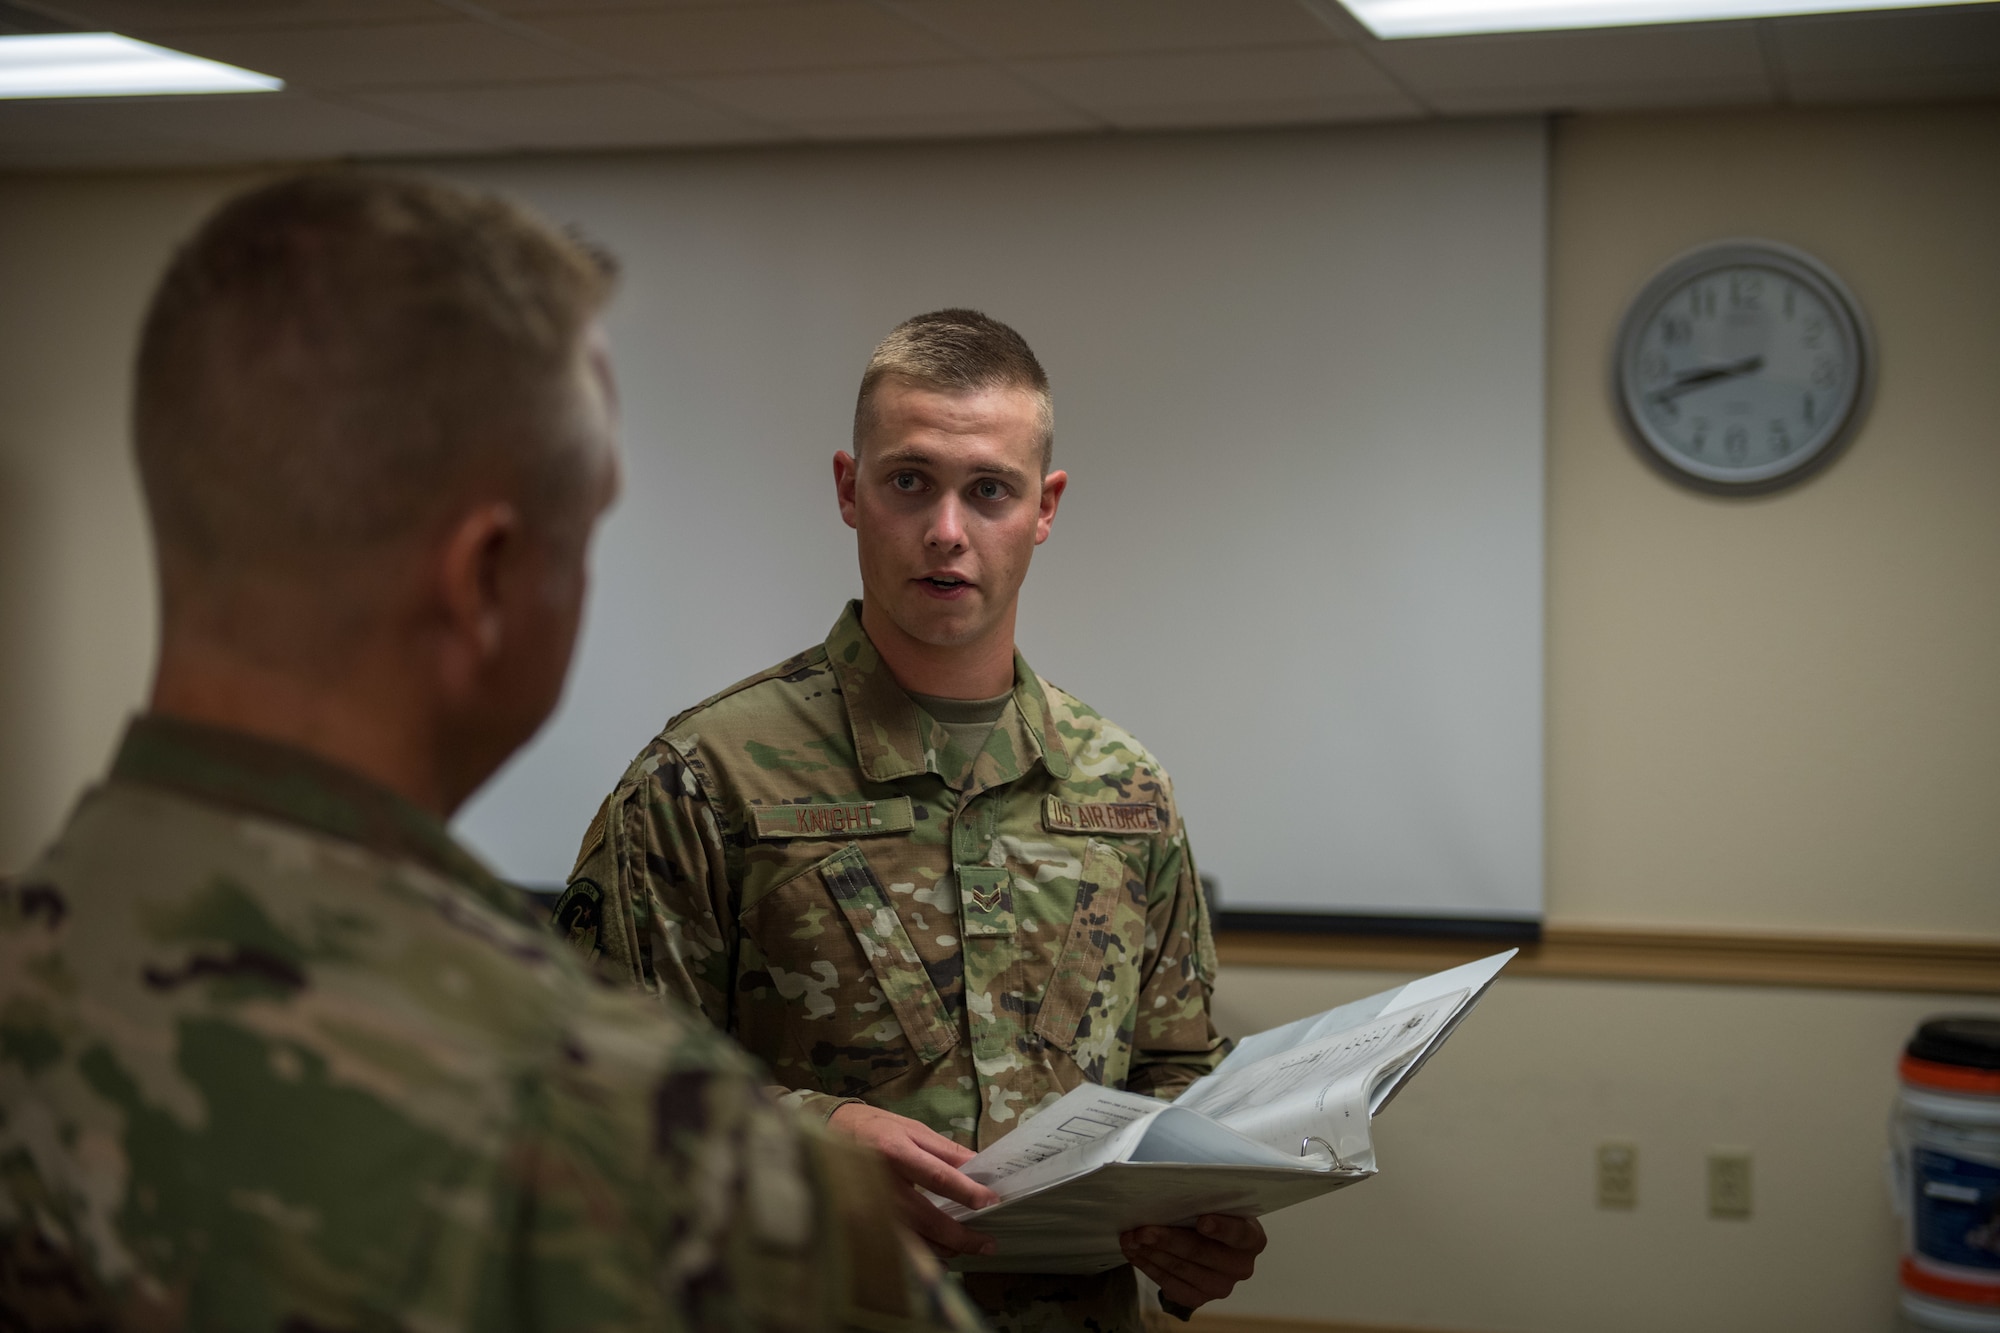 (Right) U.S. Air Force Airman 1st Class Thomas Knight, 325th Maintenance Squadron stockpile surveillance crew chief, gives Col. Brian Laidlaw, 325th Fighter Wing commander, a safety briefing at Tyndall Air Force Base, Florida, July 17, 2019.